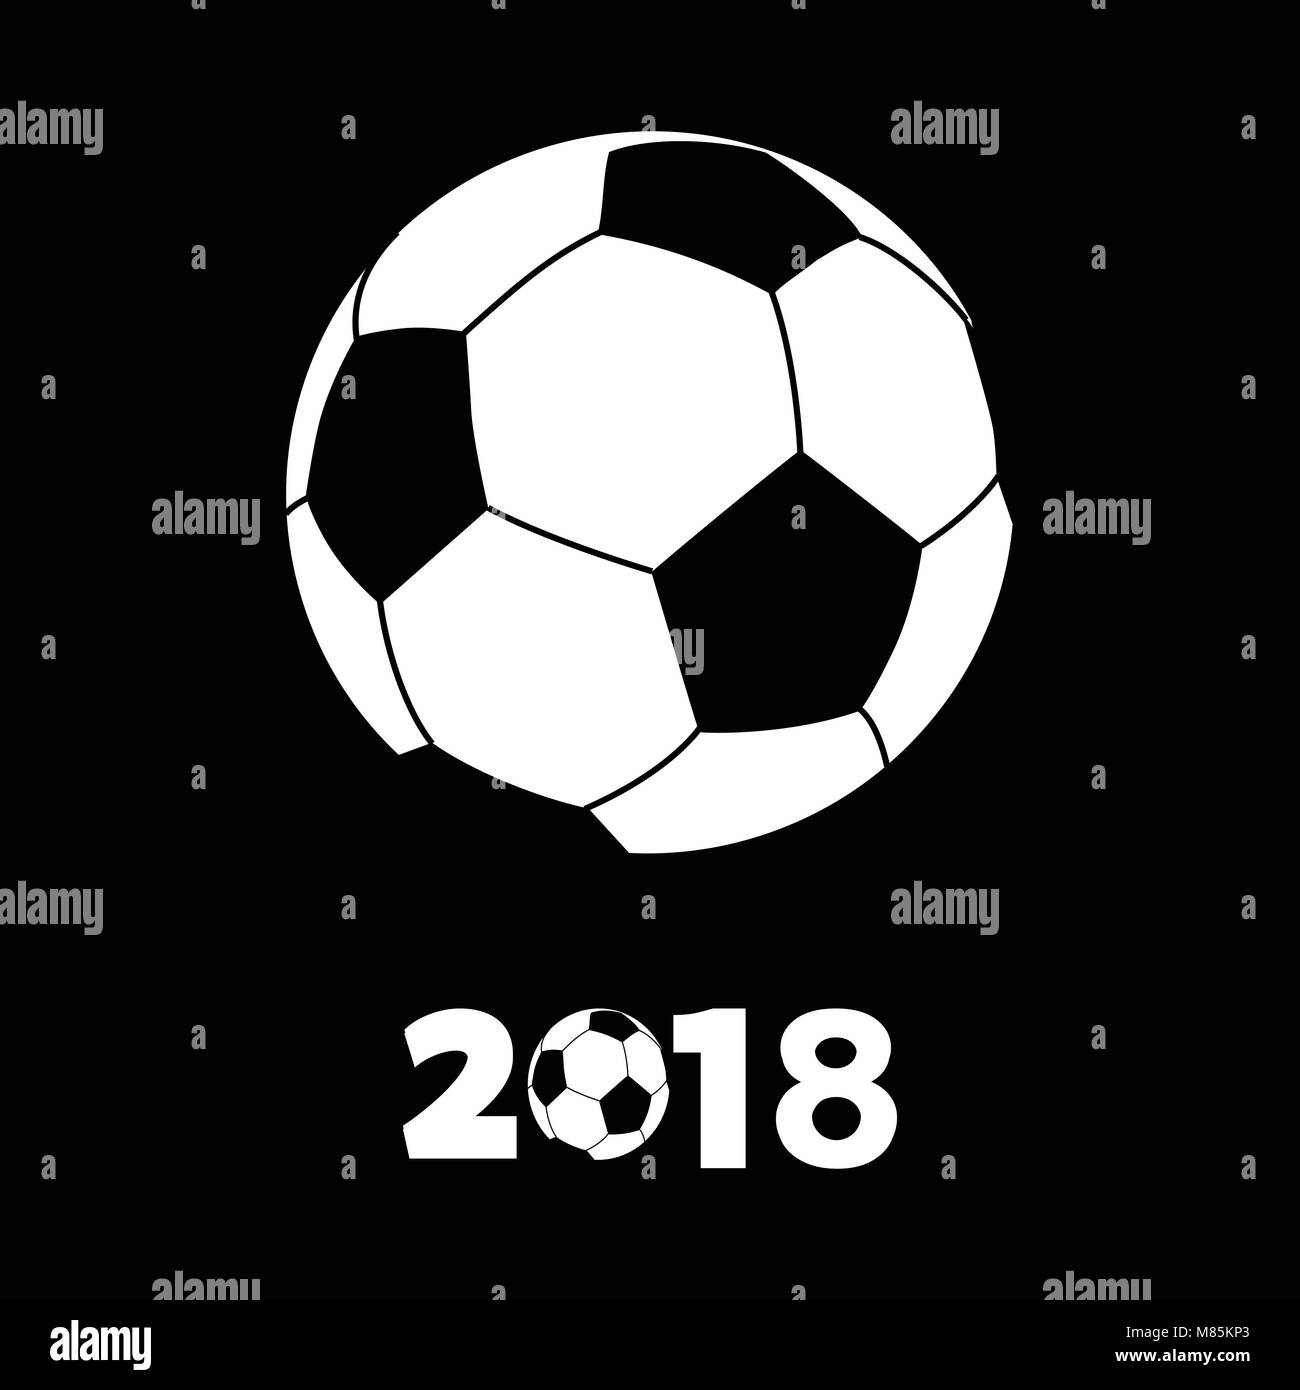 Drawing Style White Silhouette of Soccer Football with Decorative 2018 Over Black Background Stock Vector